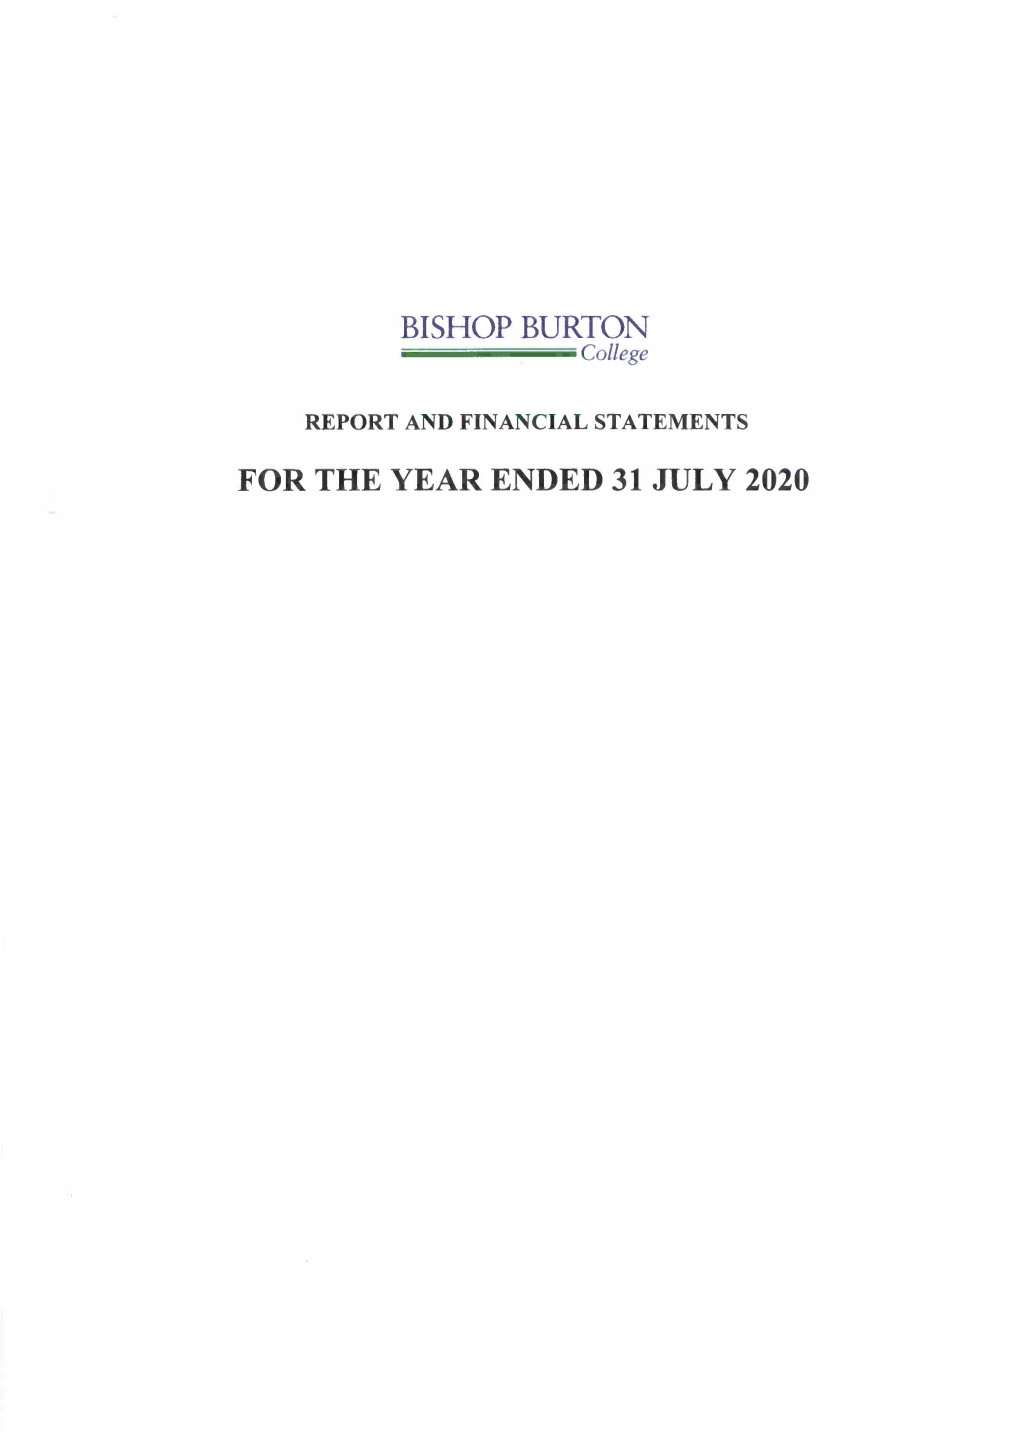 Bishop Burton College MEMBERS' REPORT and FINANCIAL STATEMENTS for the Year Ended 31 July 2020